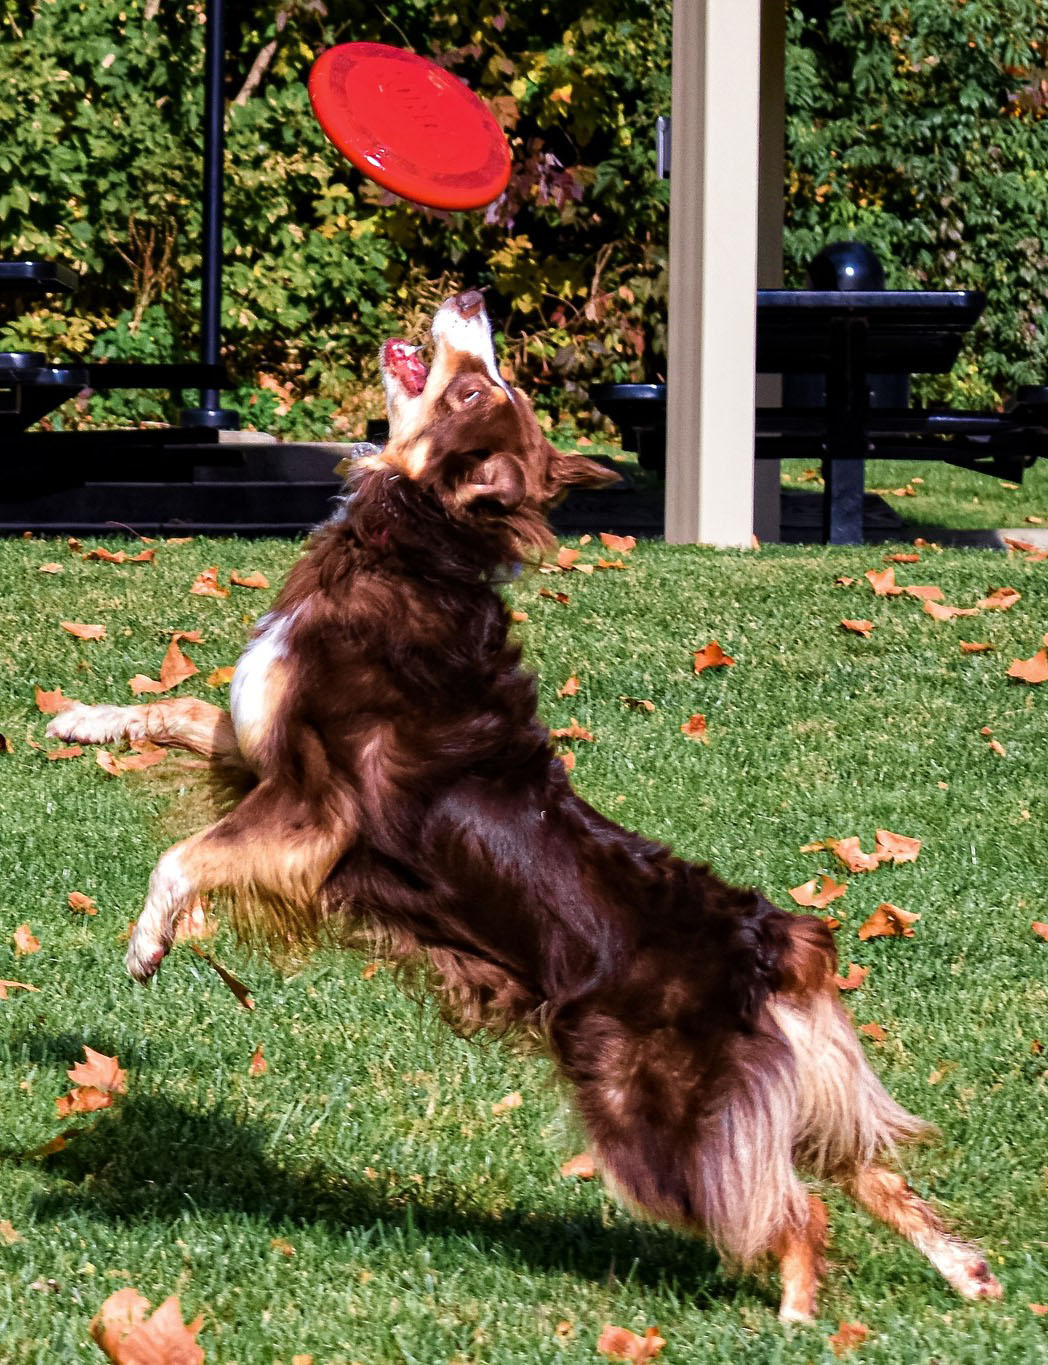 Dog jumping up to catch a frisbee.